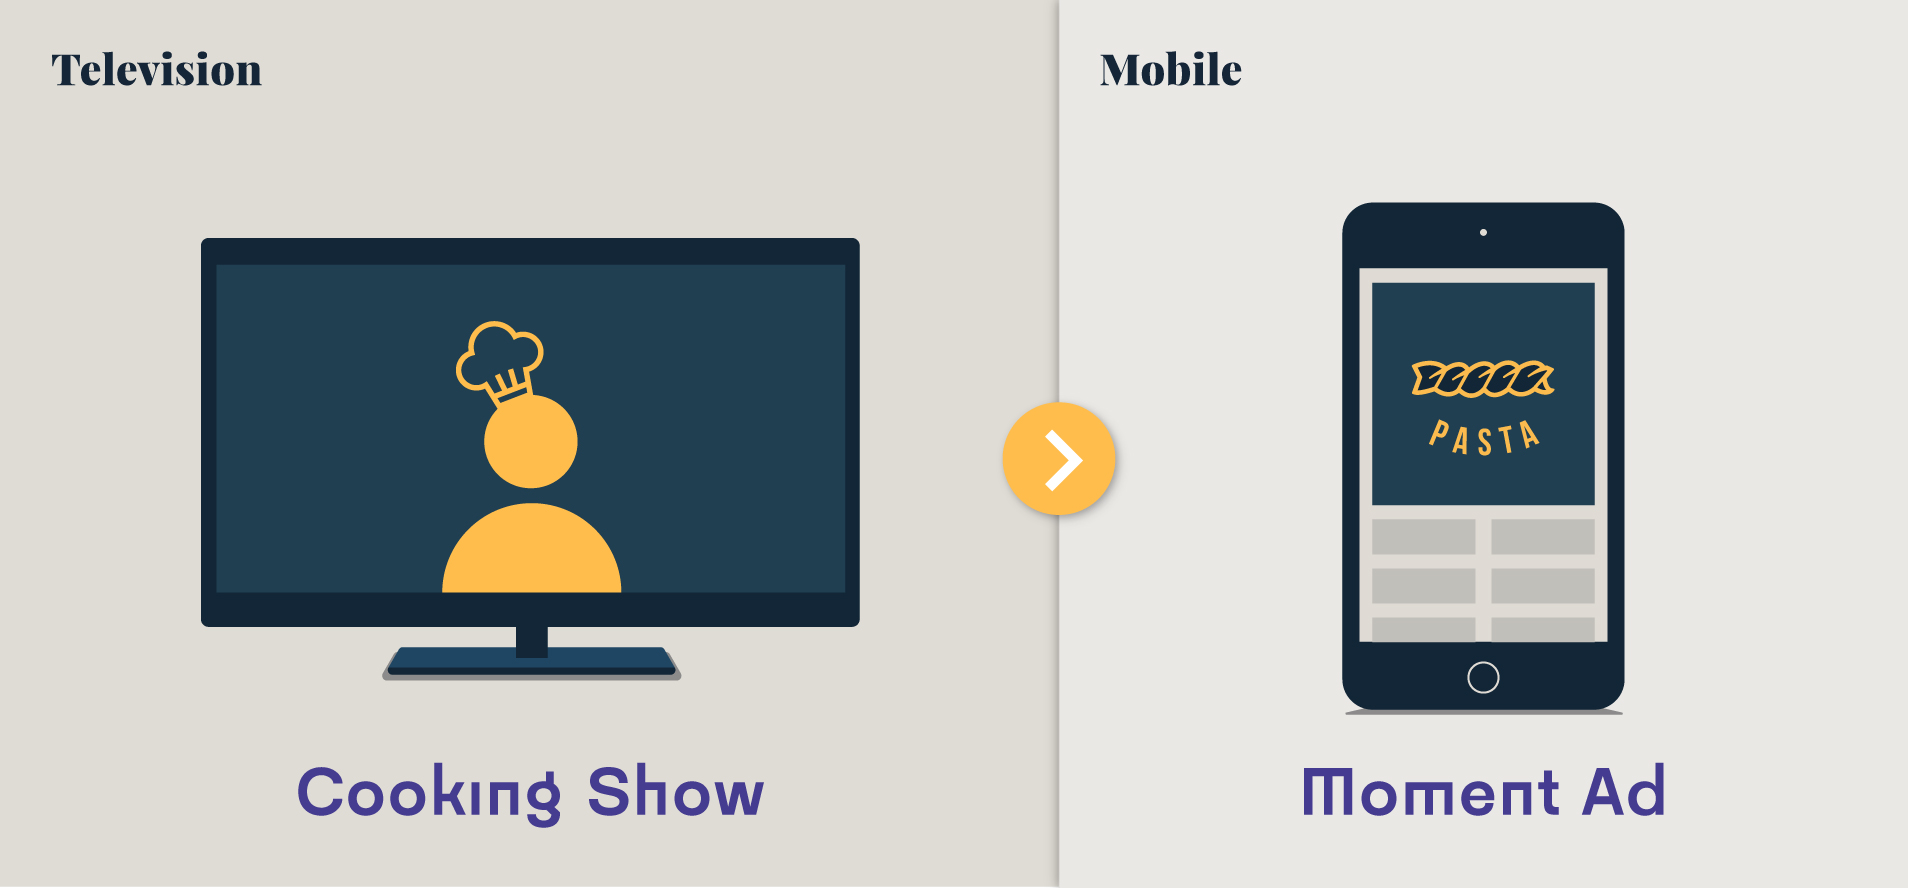 Television and mobile advertising